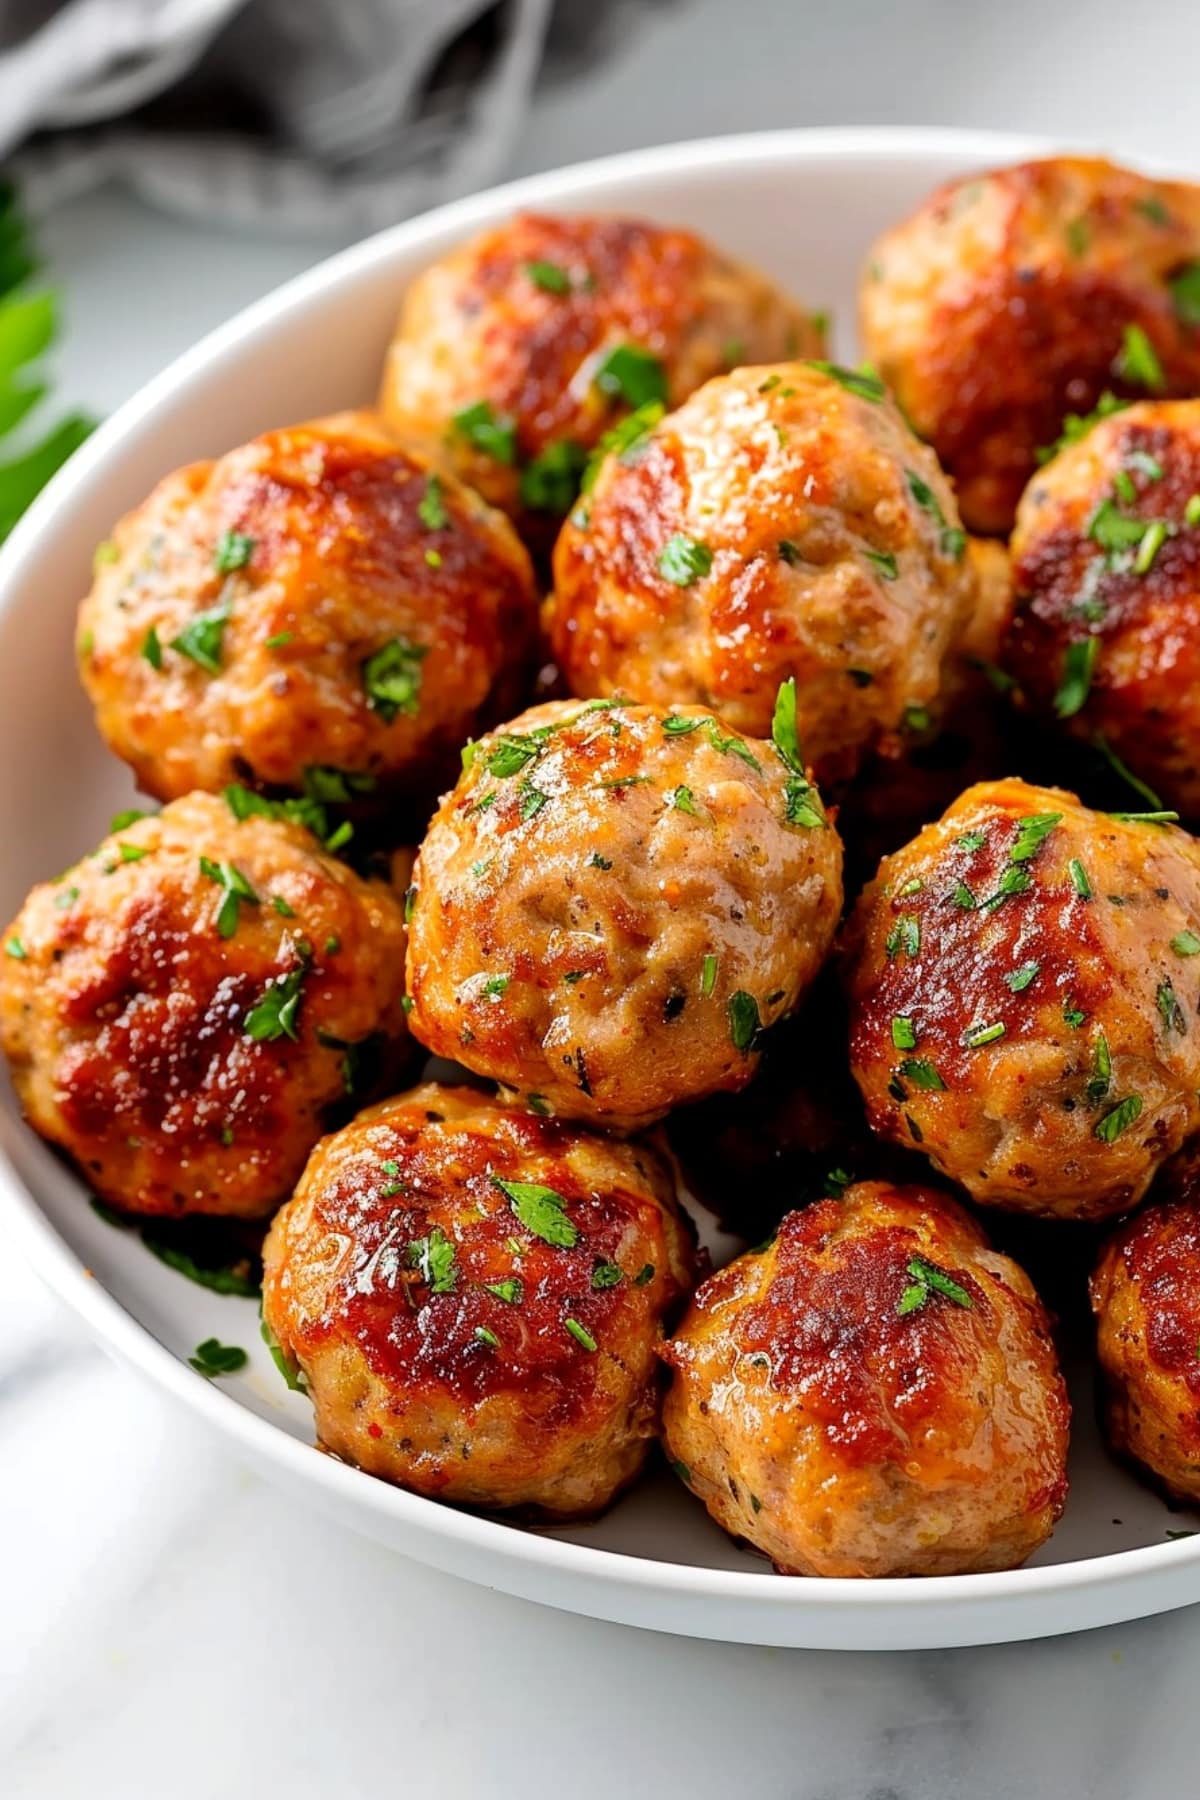 Turkey Meatballs in a White Bowl with Parsley